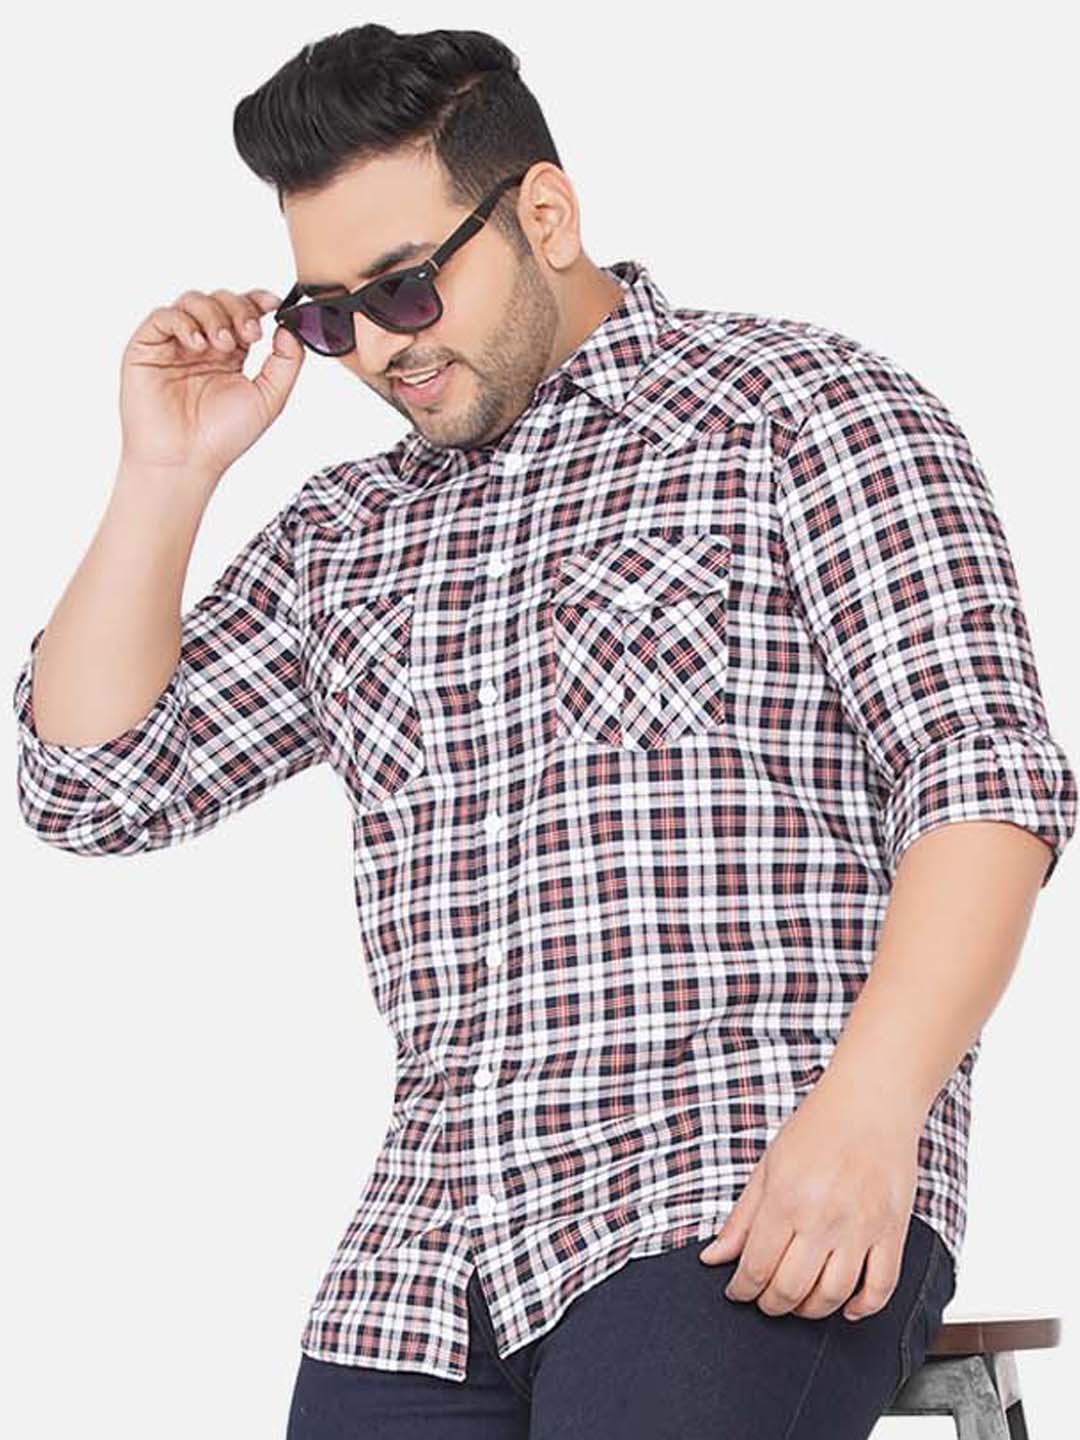 The Double-Pocket Checkered Shirt